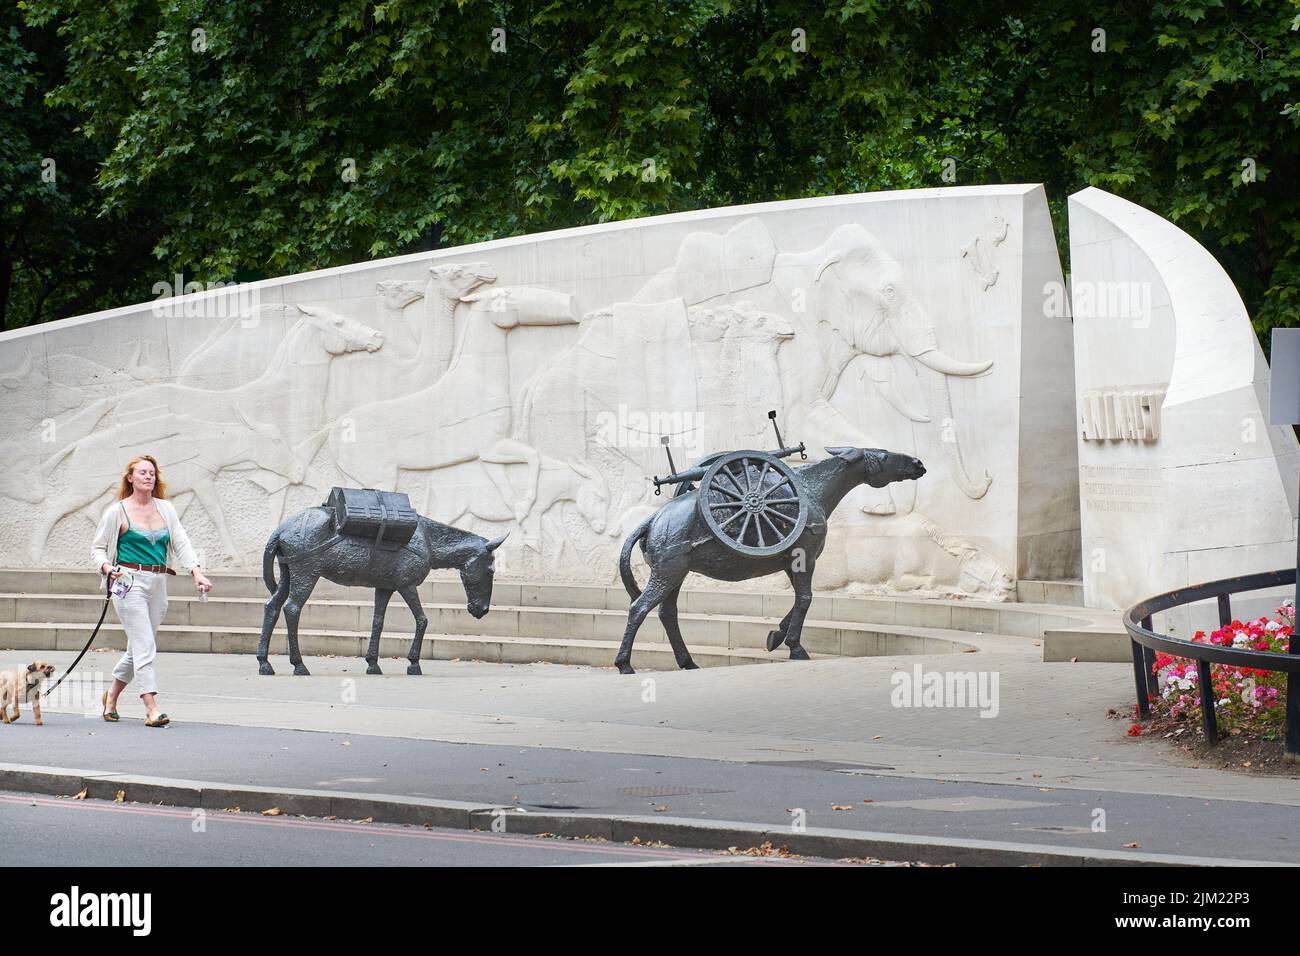 A woman with her dog walks past the Animals in War memorial at Park Lane, Mayfair, London, England. Stock Photo